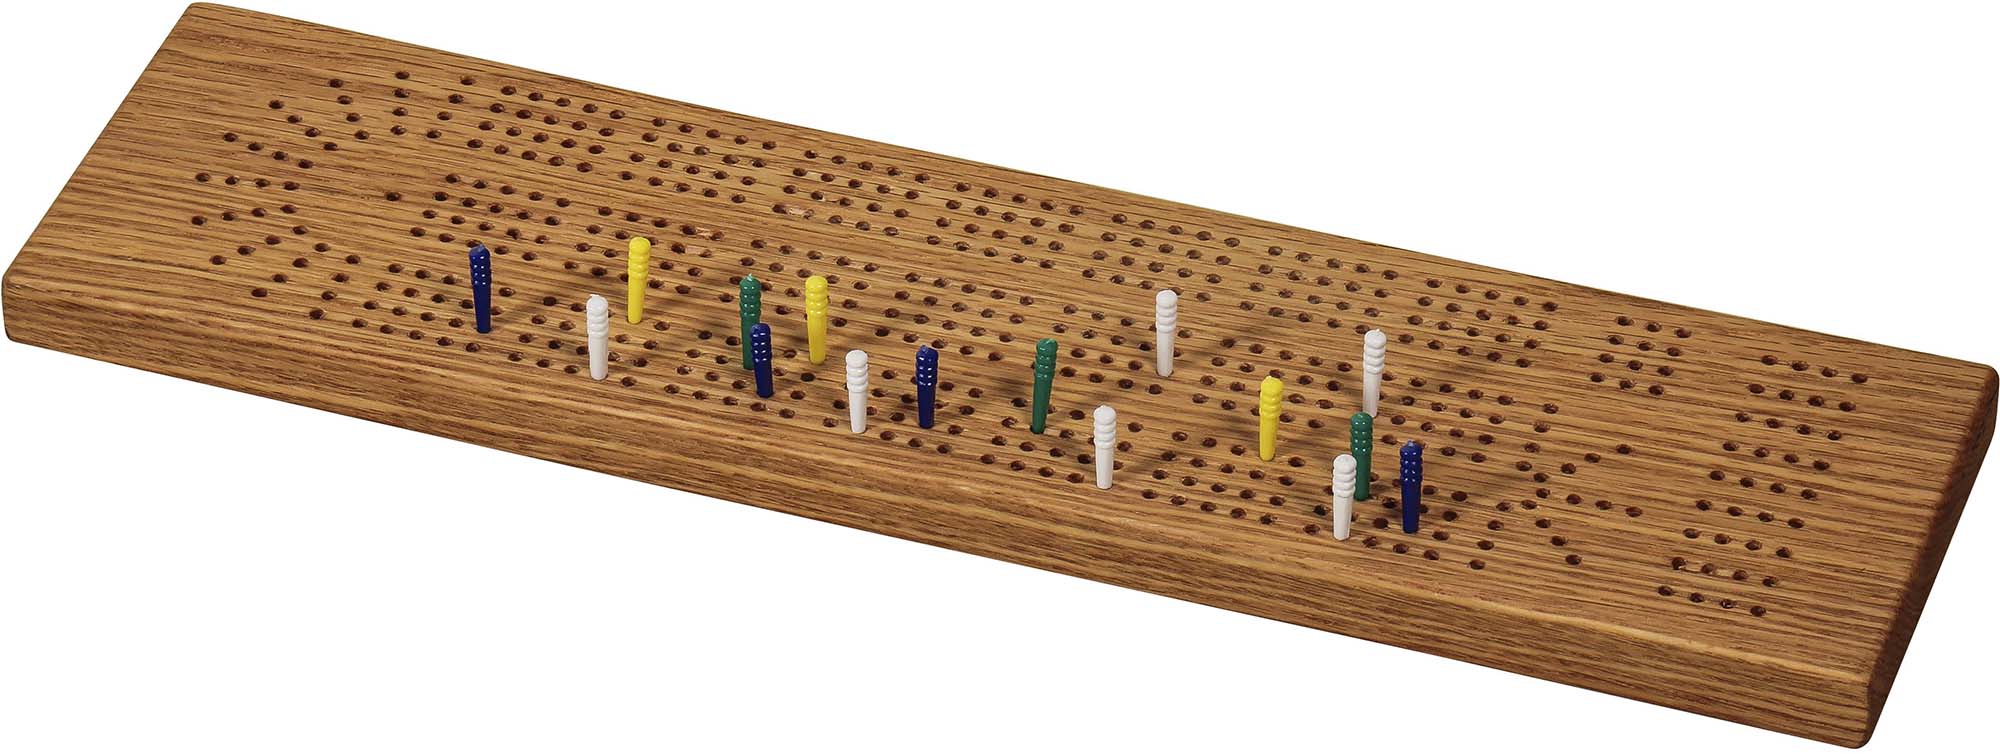 Four Player Cribbage Board